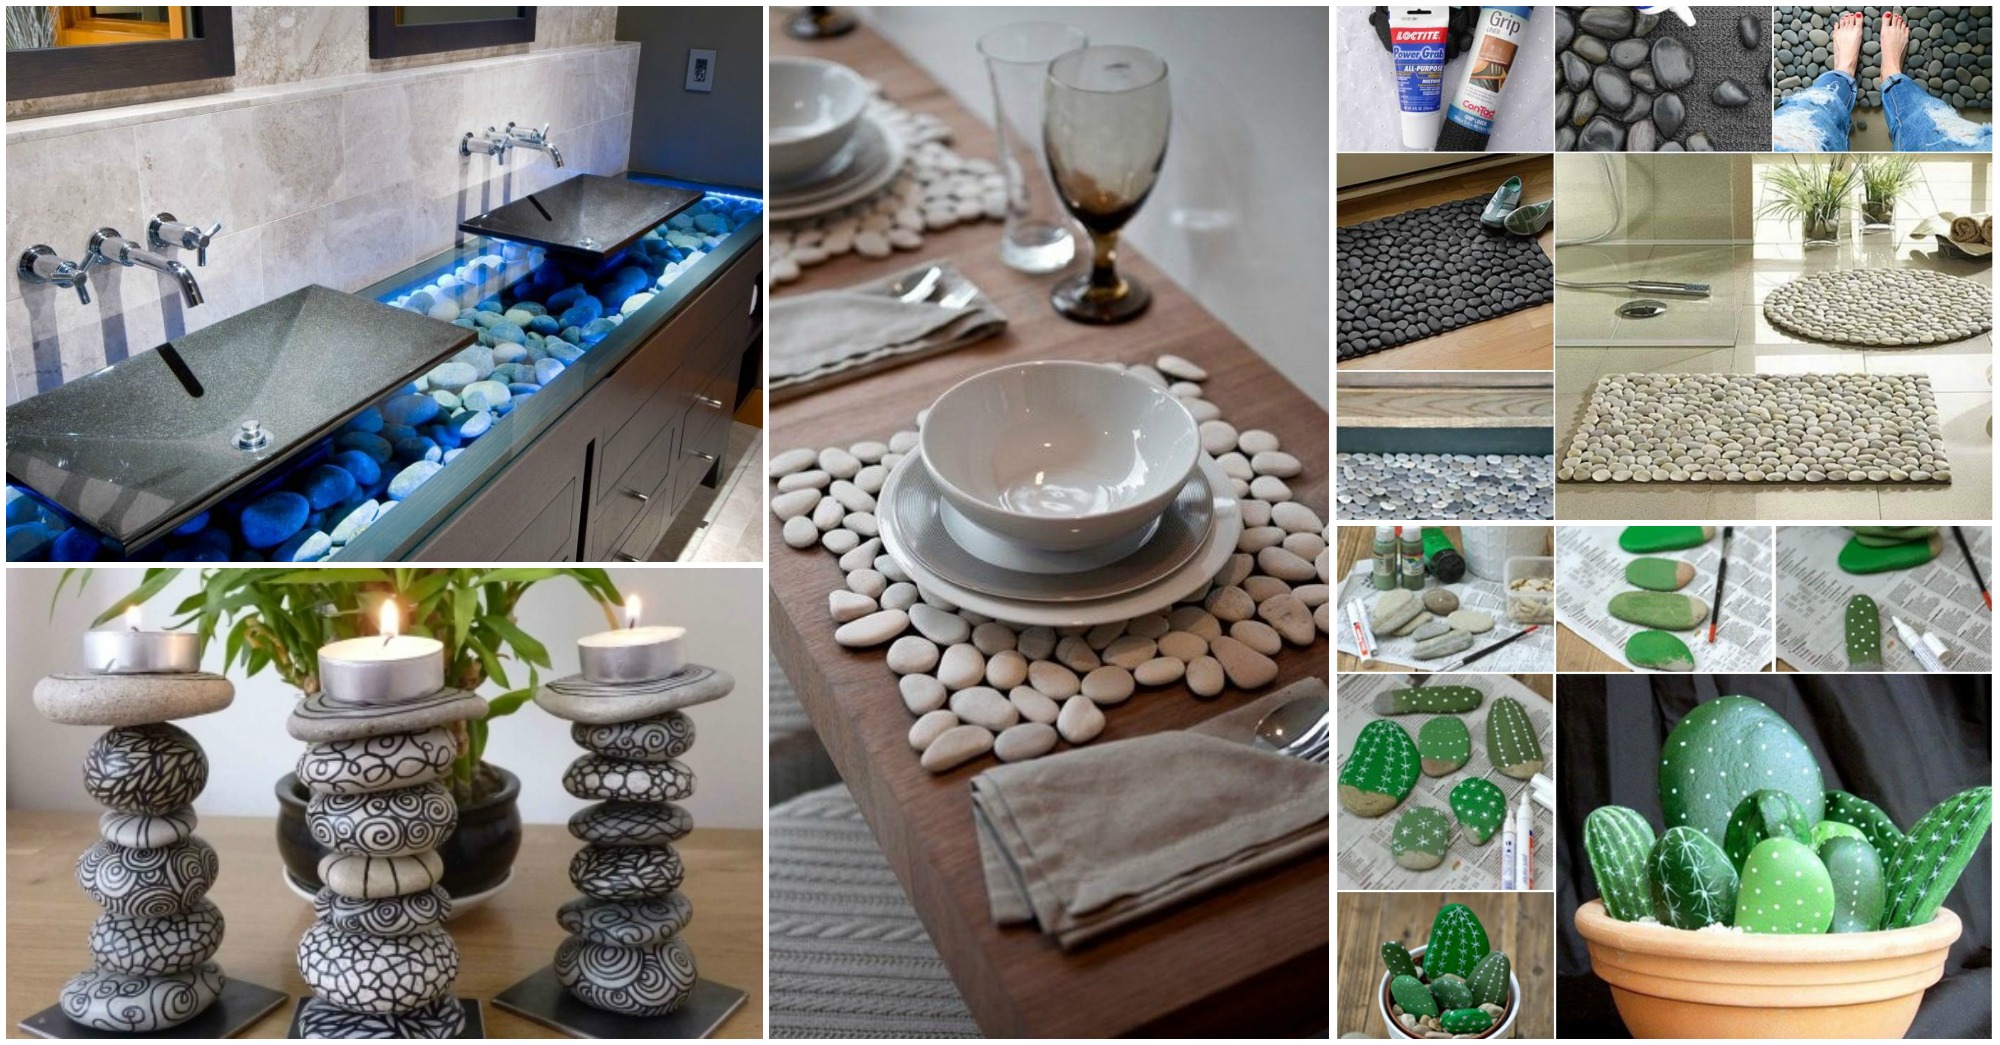 DIY Unimaginable Stone Craft Home Decor Ideas That Will Amaze You